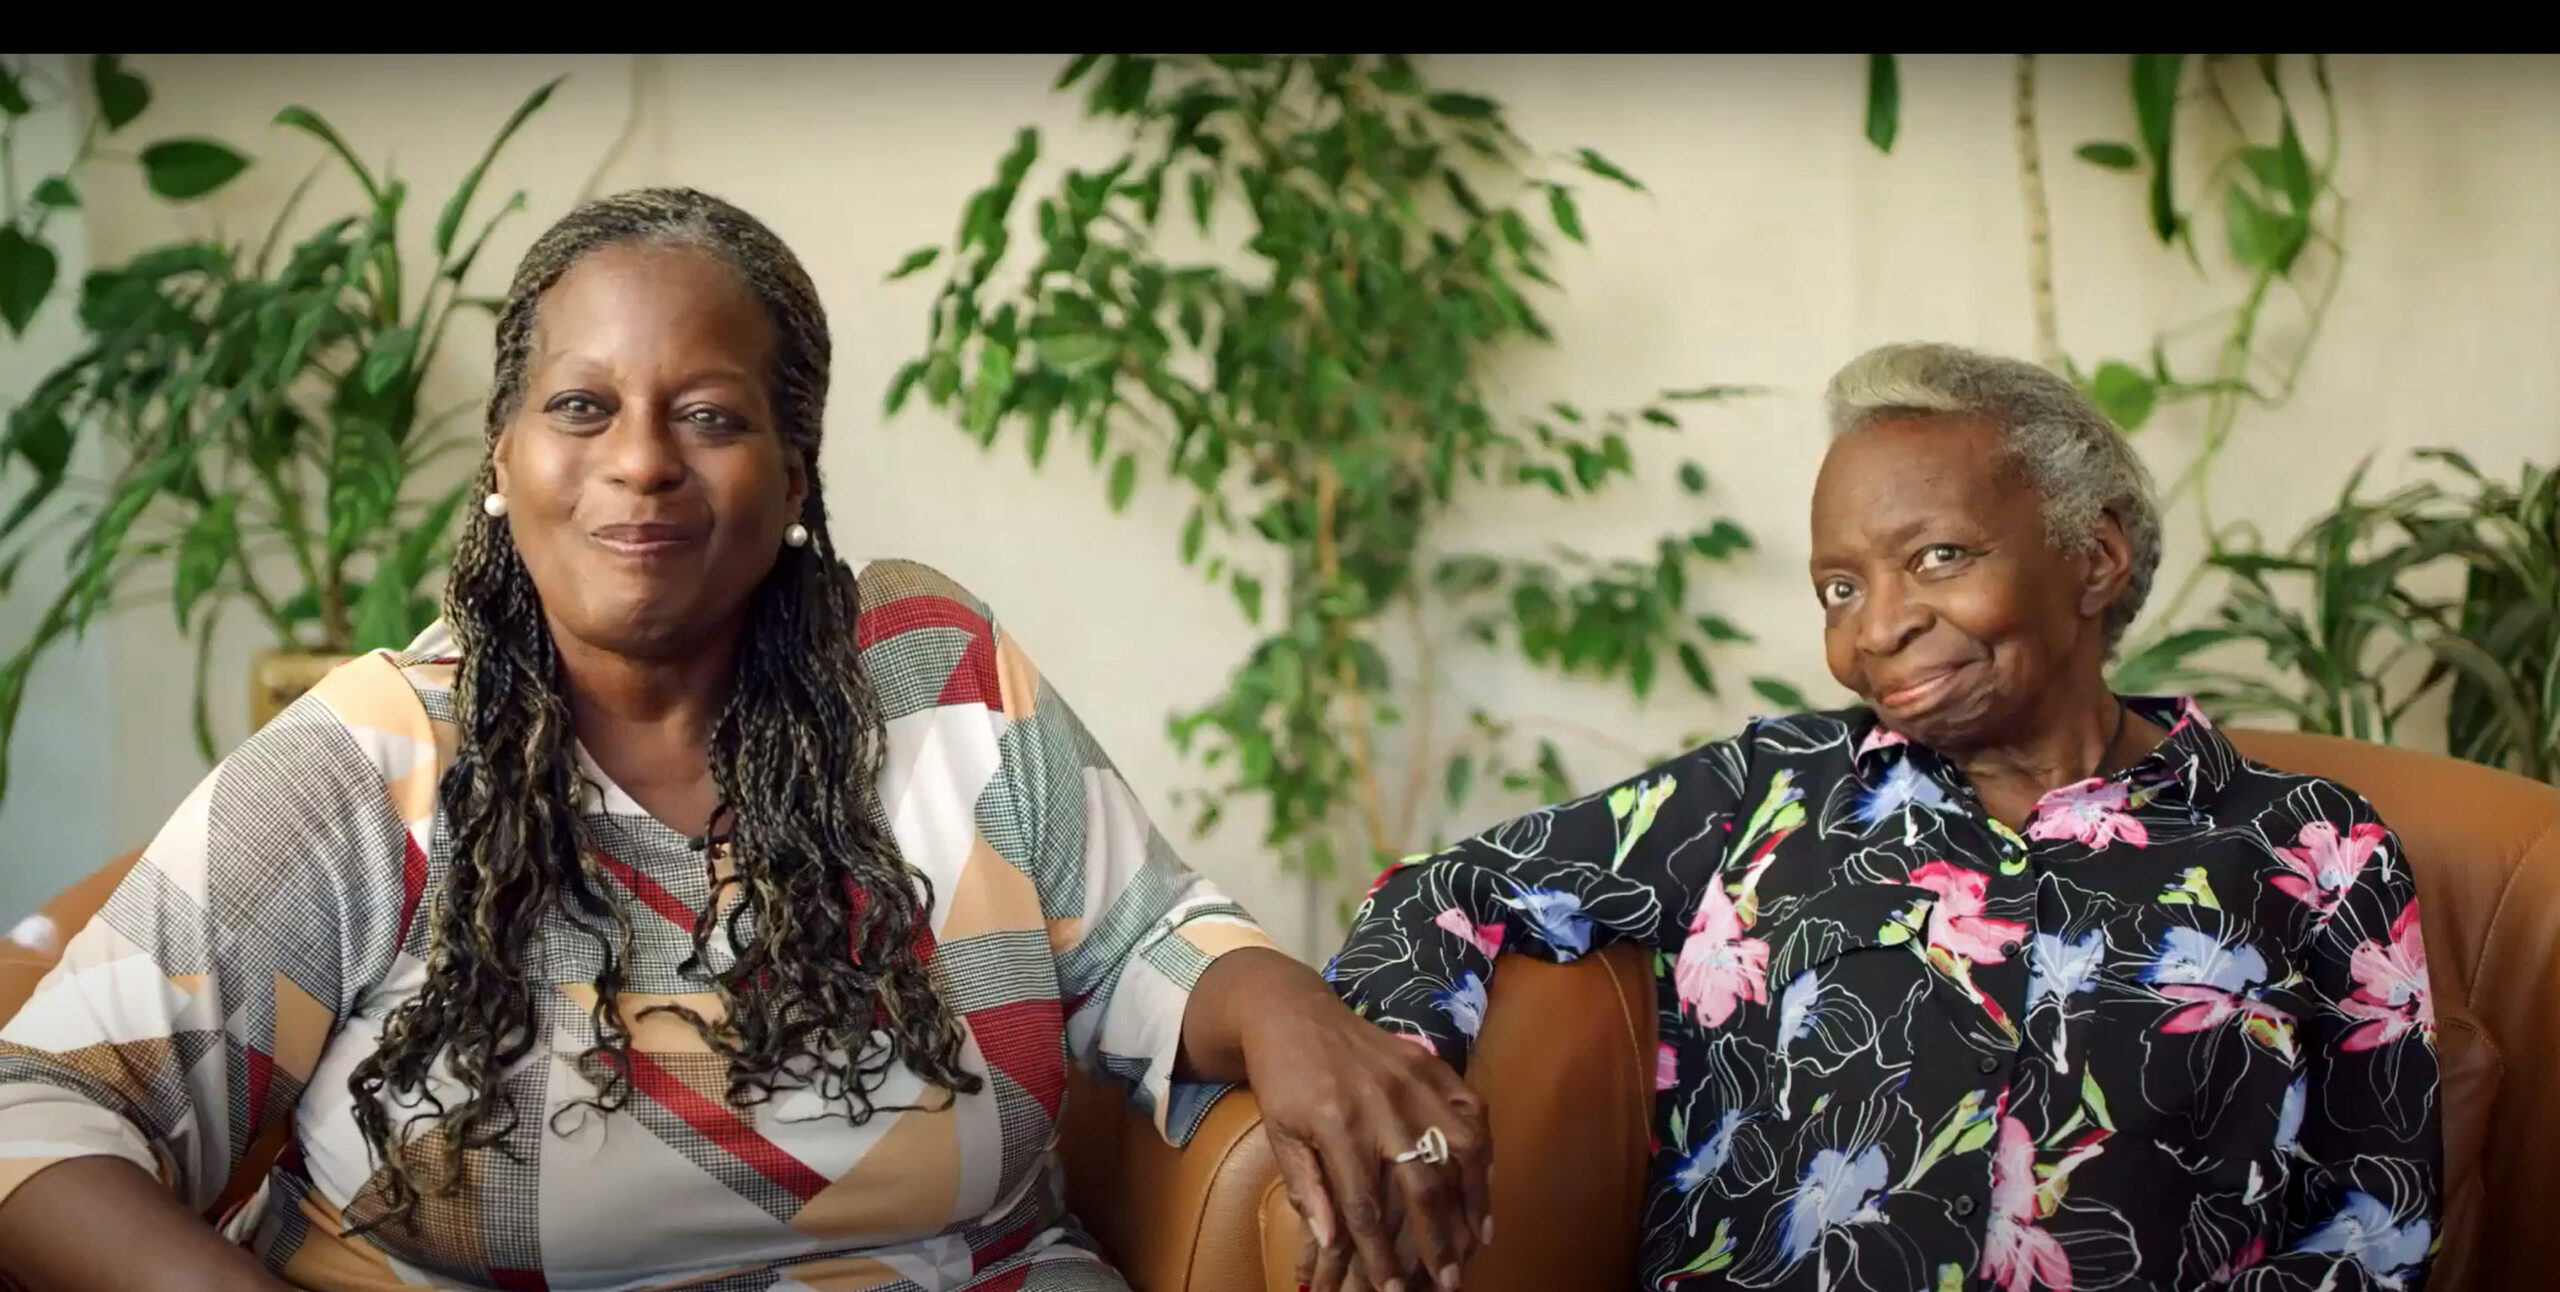 Freda and Delores talking in Caregiving video